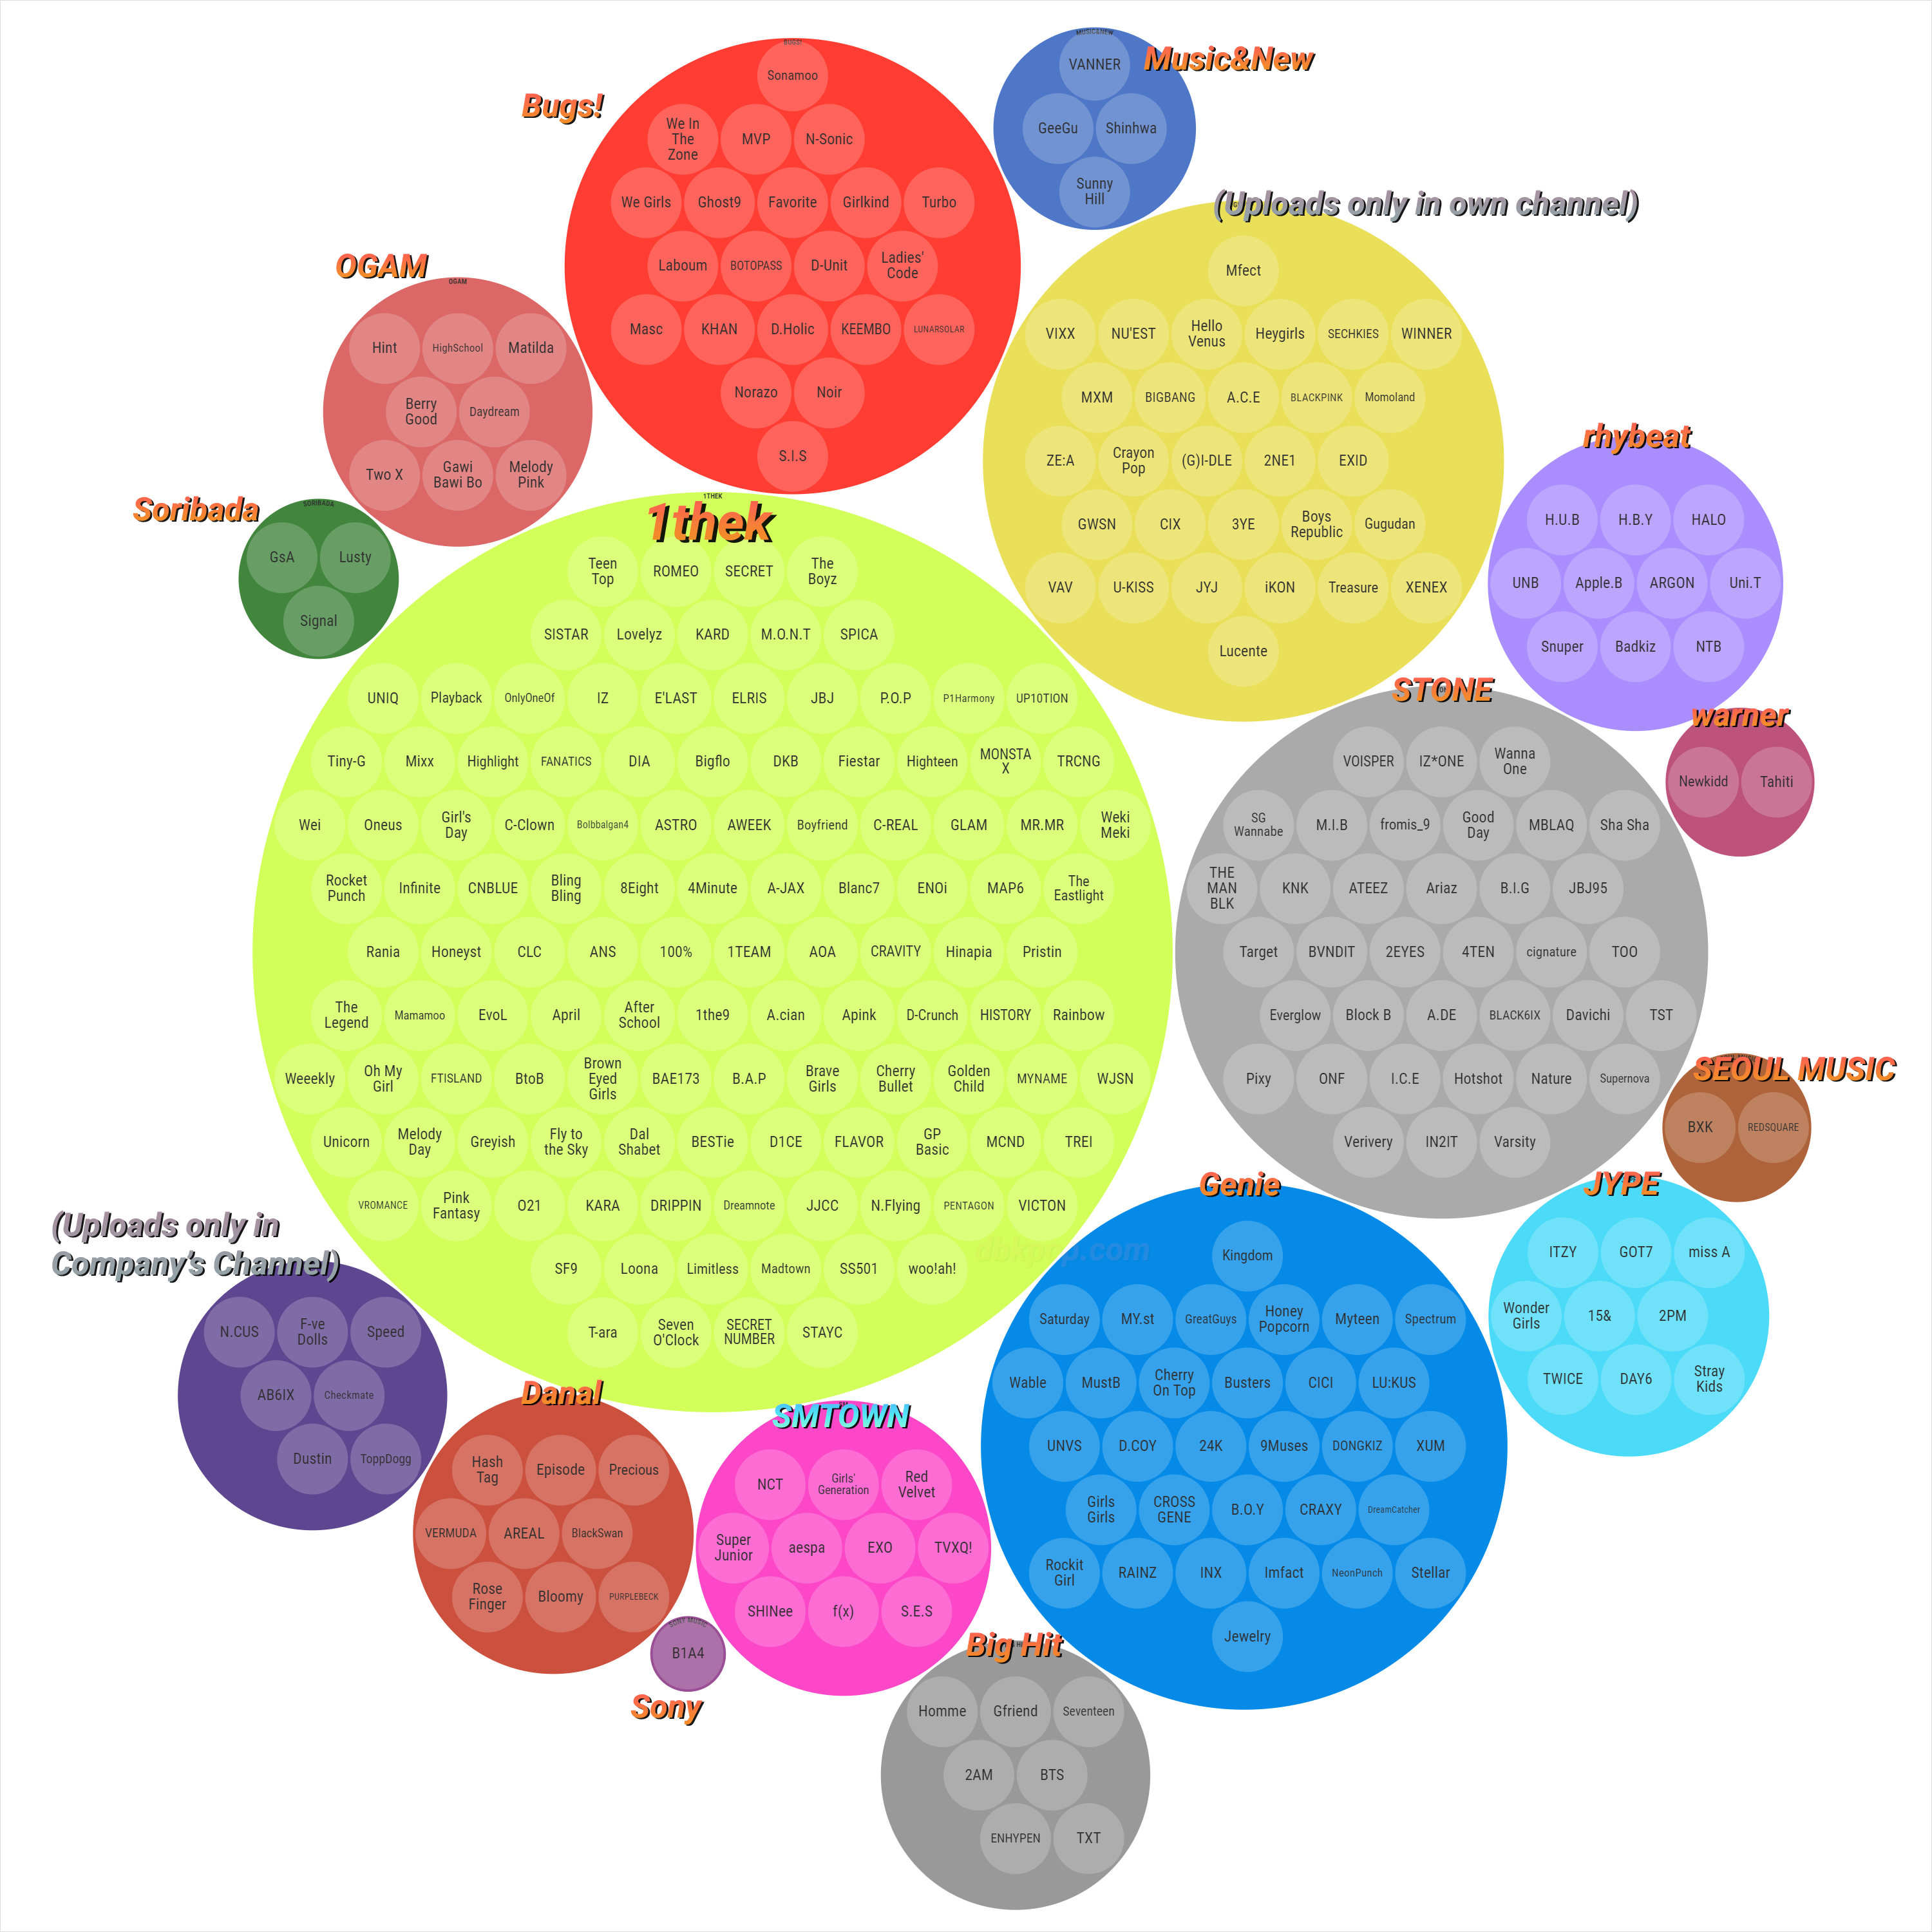 Packed Circle Chart - K-Pop Groups and YouTube Distribution Channels